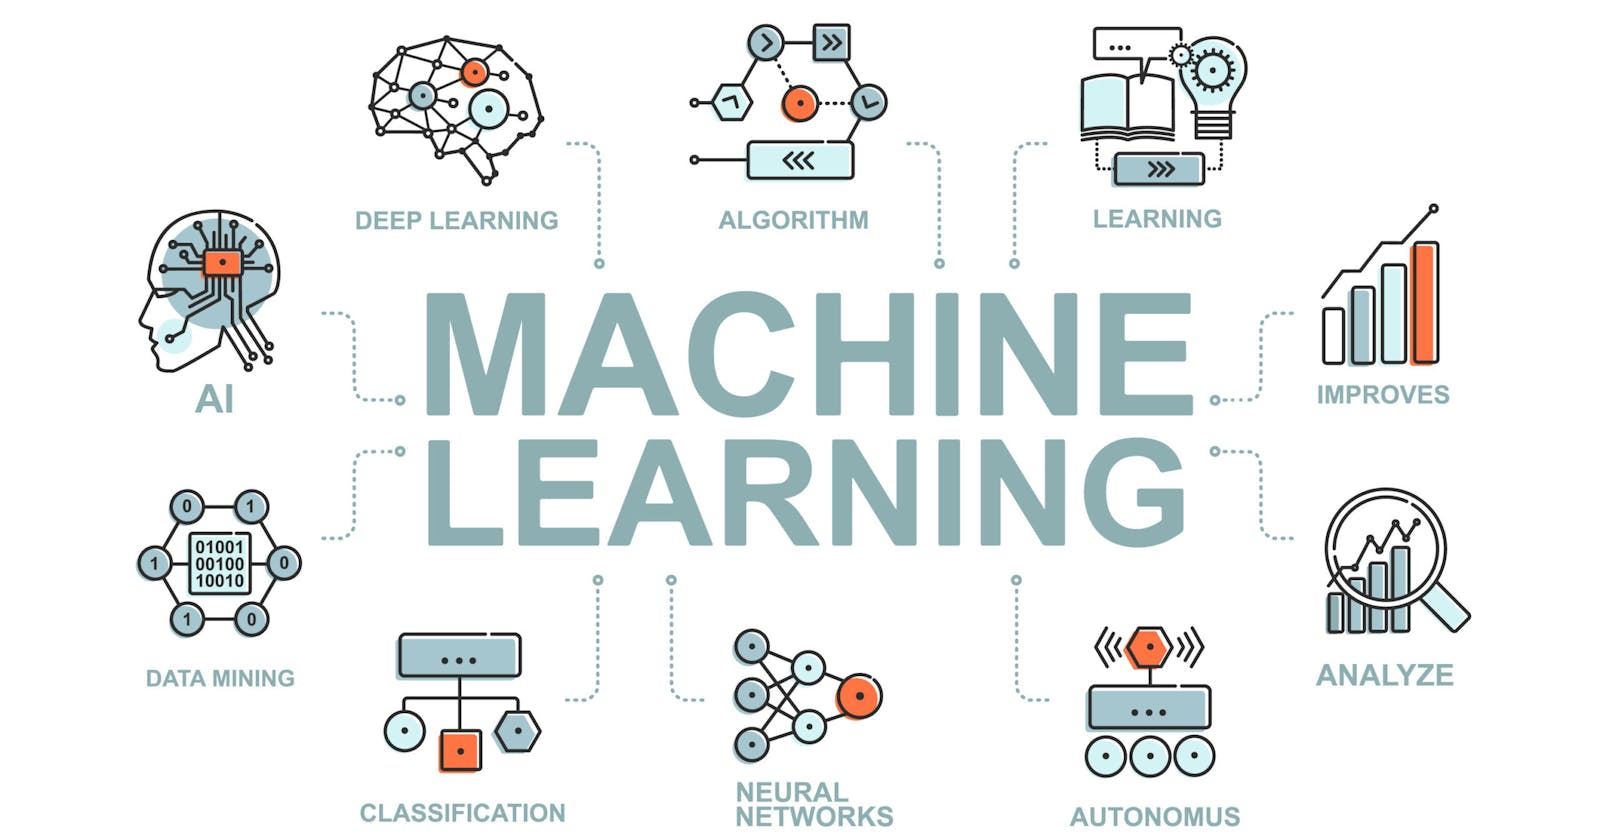 Getting started in Machine Learning